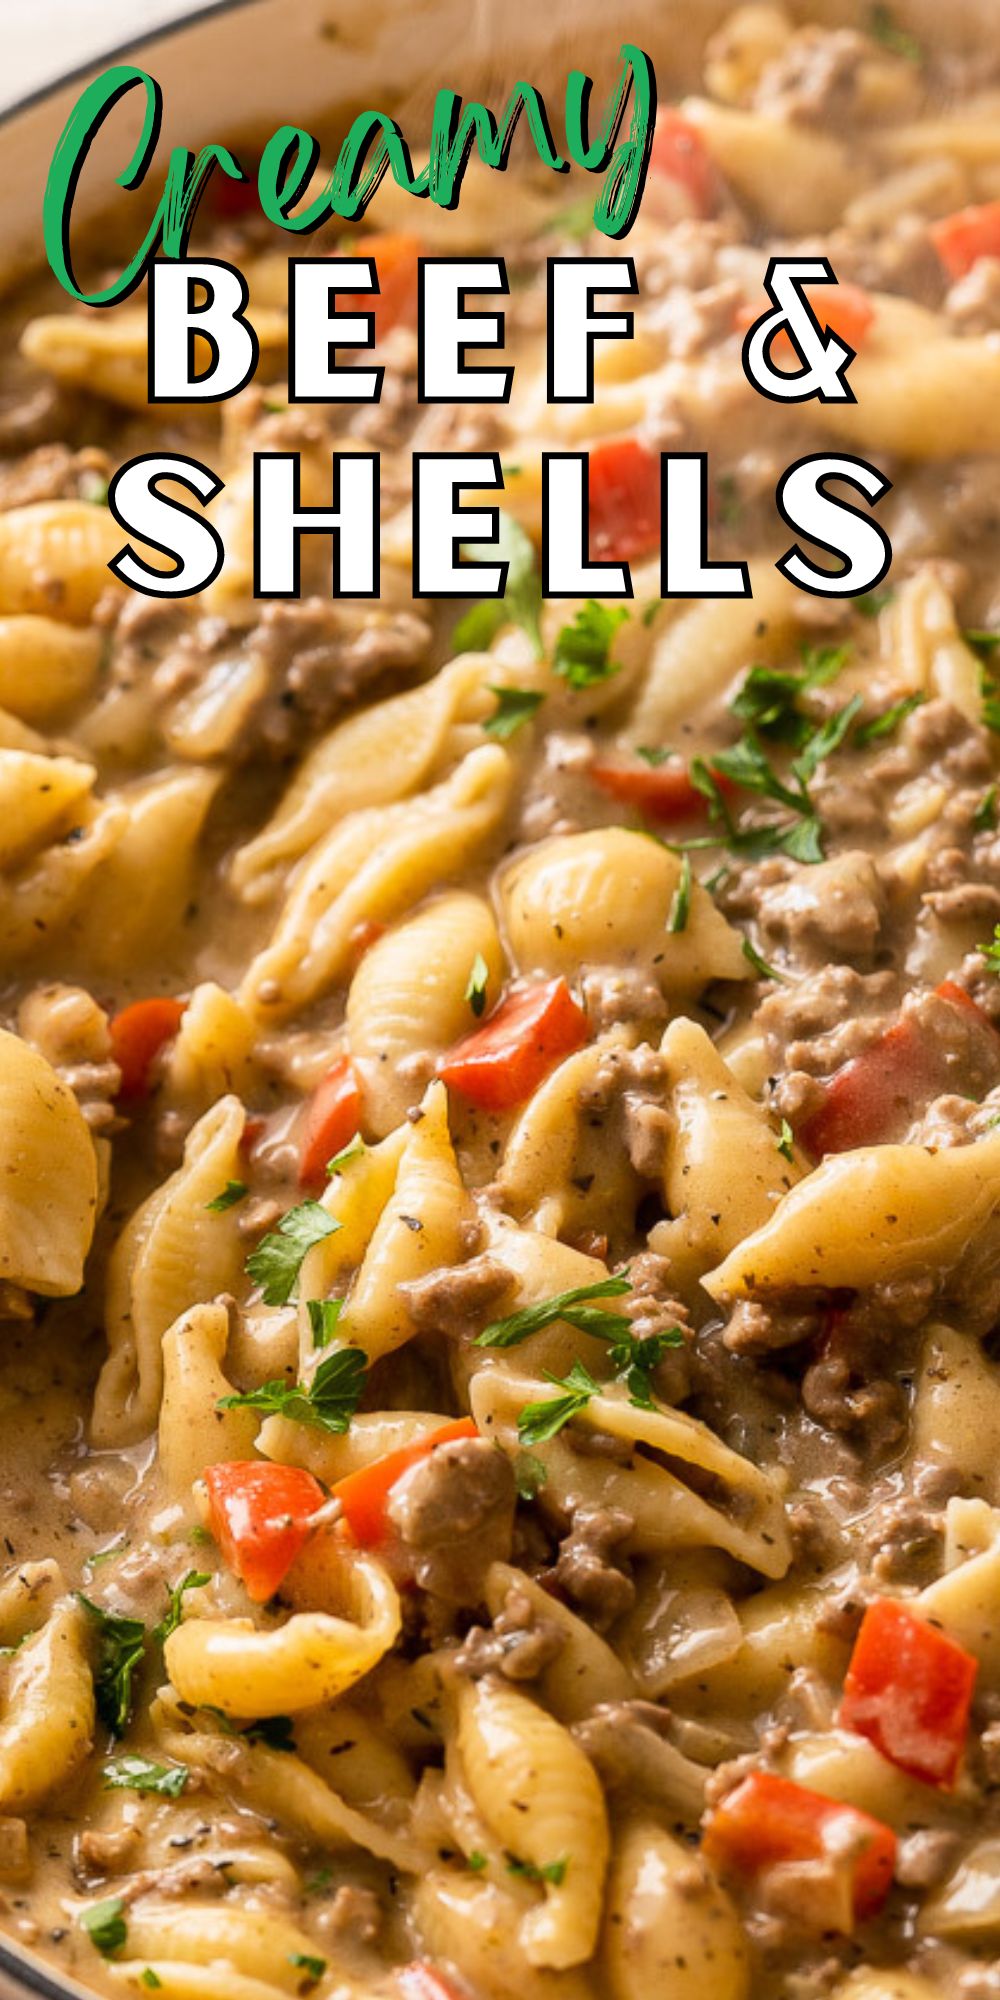 Creamy Beef and Shells - I Wash You Dry